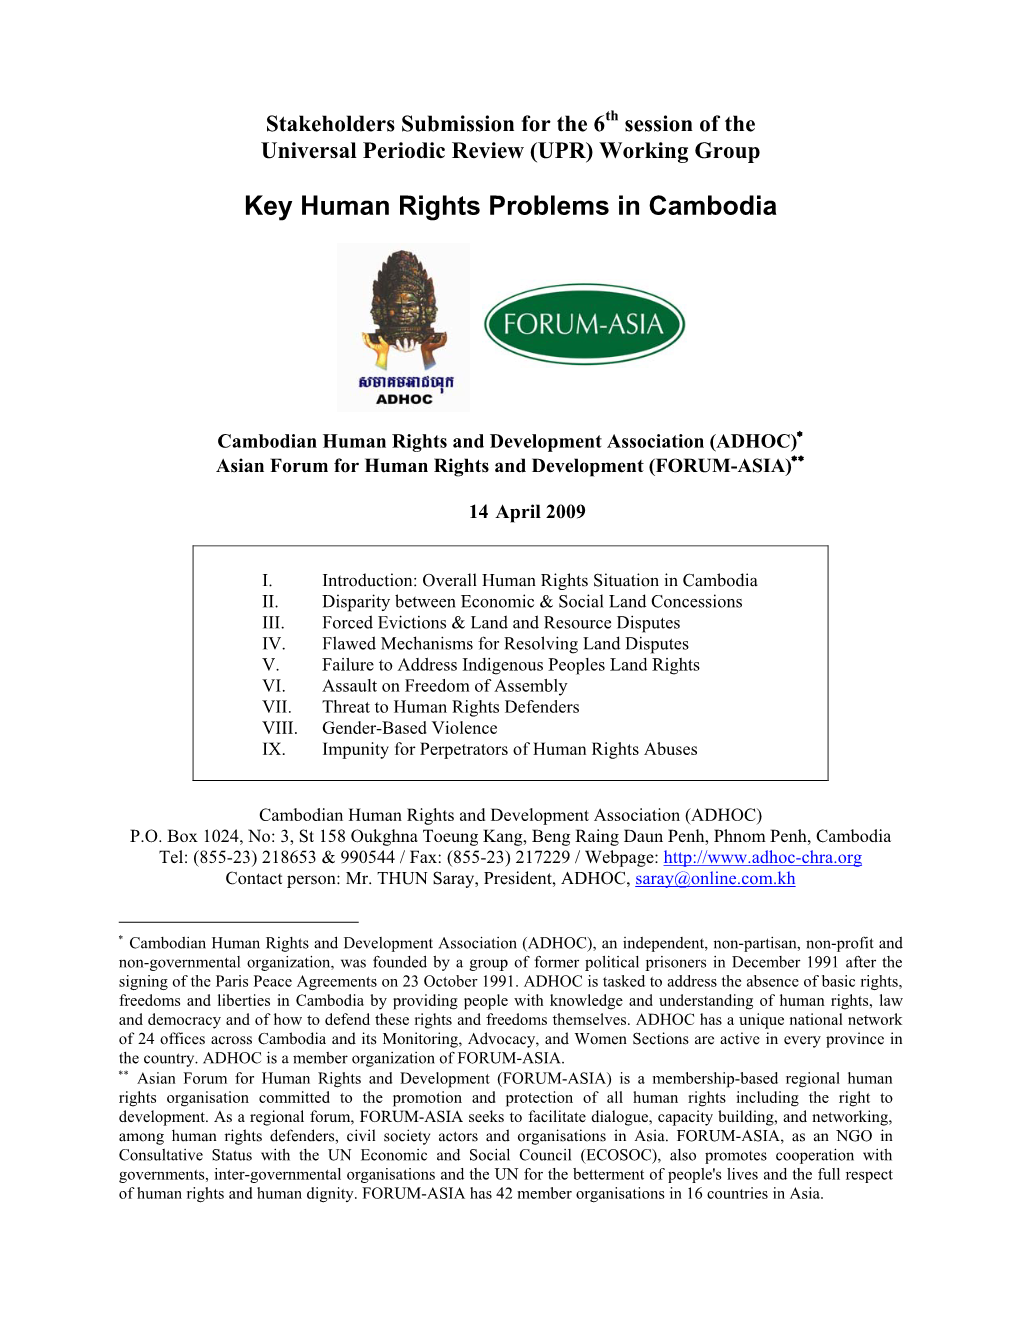 Key Human Rights Problems in Cambodia